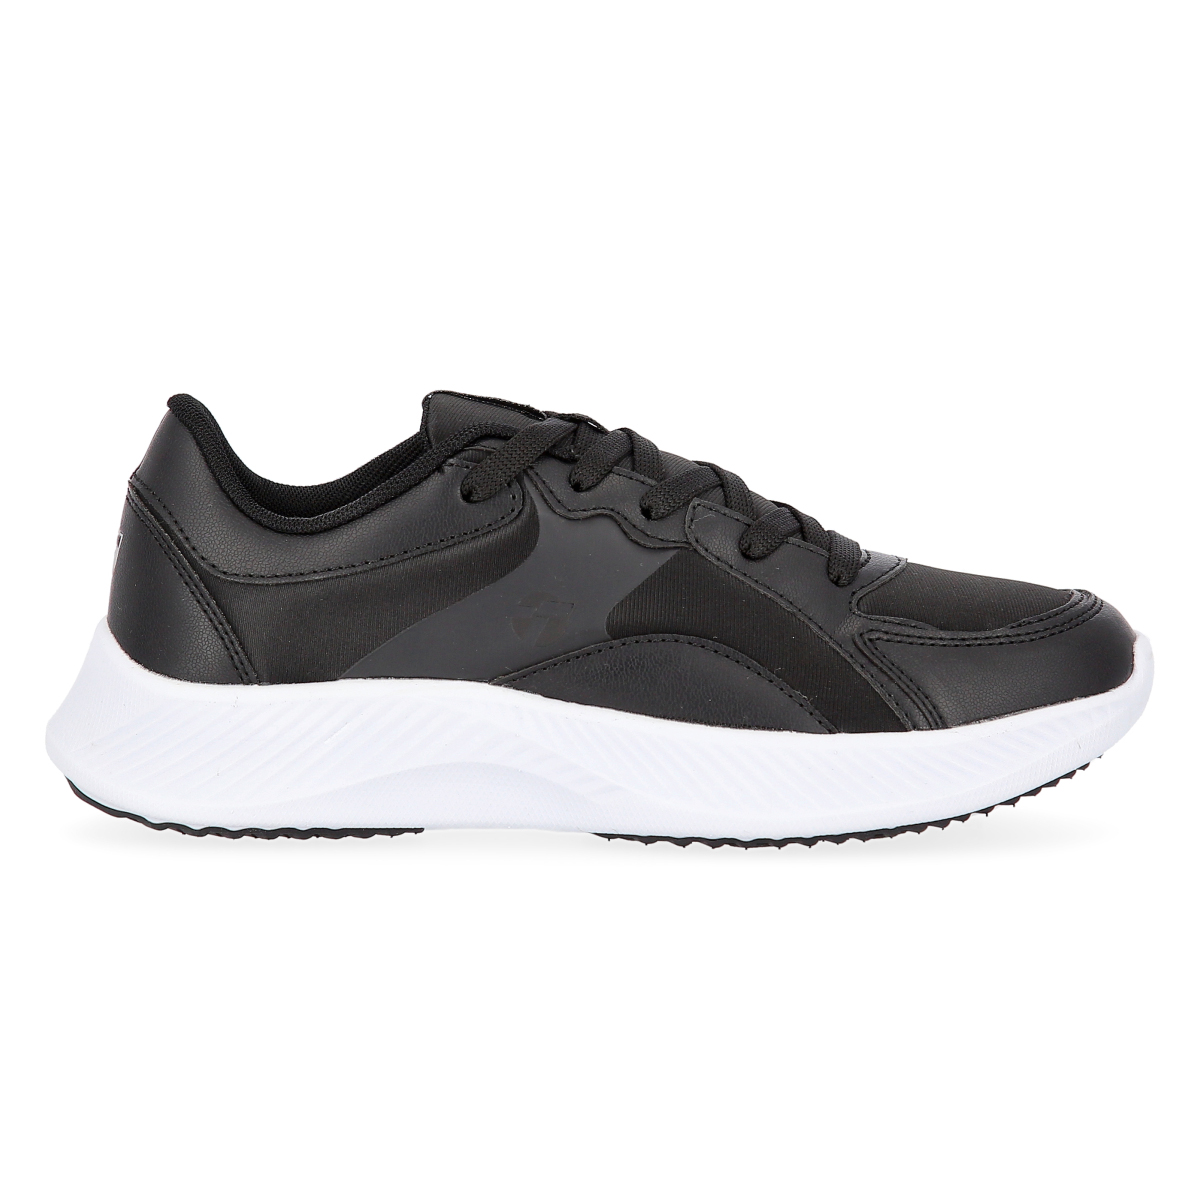 Zapatillas Entrenamiento Topper Kham Mujer,  image number null